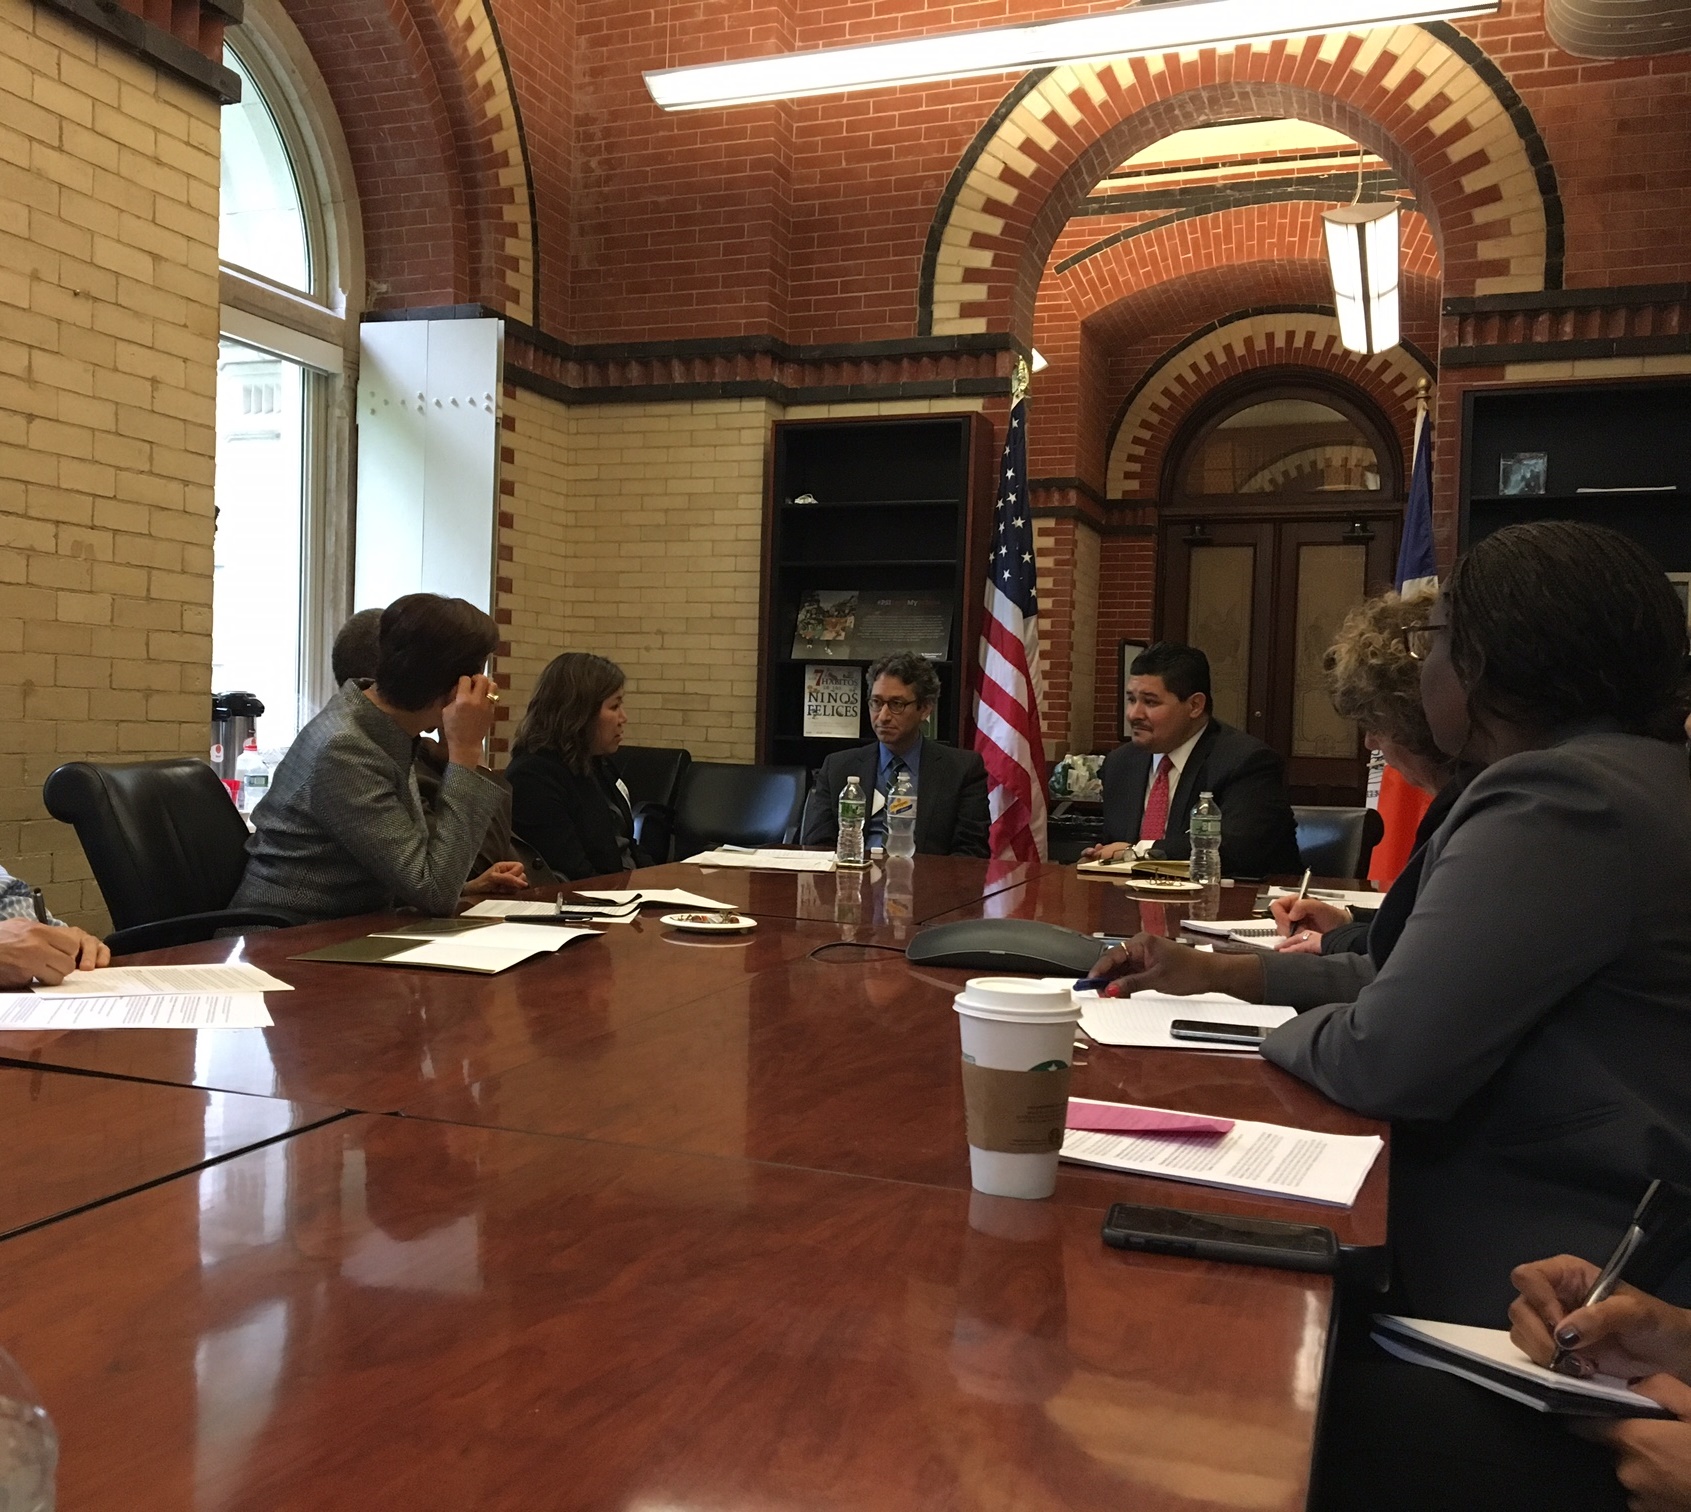 CONG. MENG MEETS WITH NYC SCHOOLS CHANCELLOR ABOUT MAYOR DE BLASIO’S PLAN TO CHANGE ADMISSIONS PROCESS FOR NEW YORK CITY’S SPECIALIZED HIGH SCHOOLS